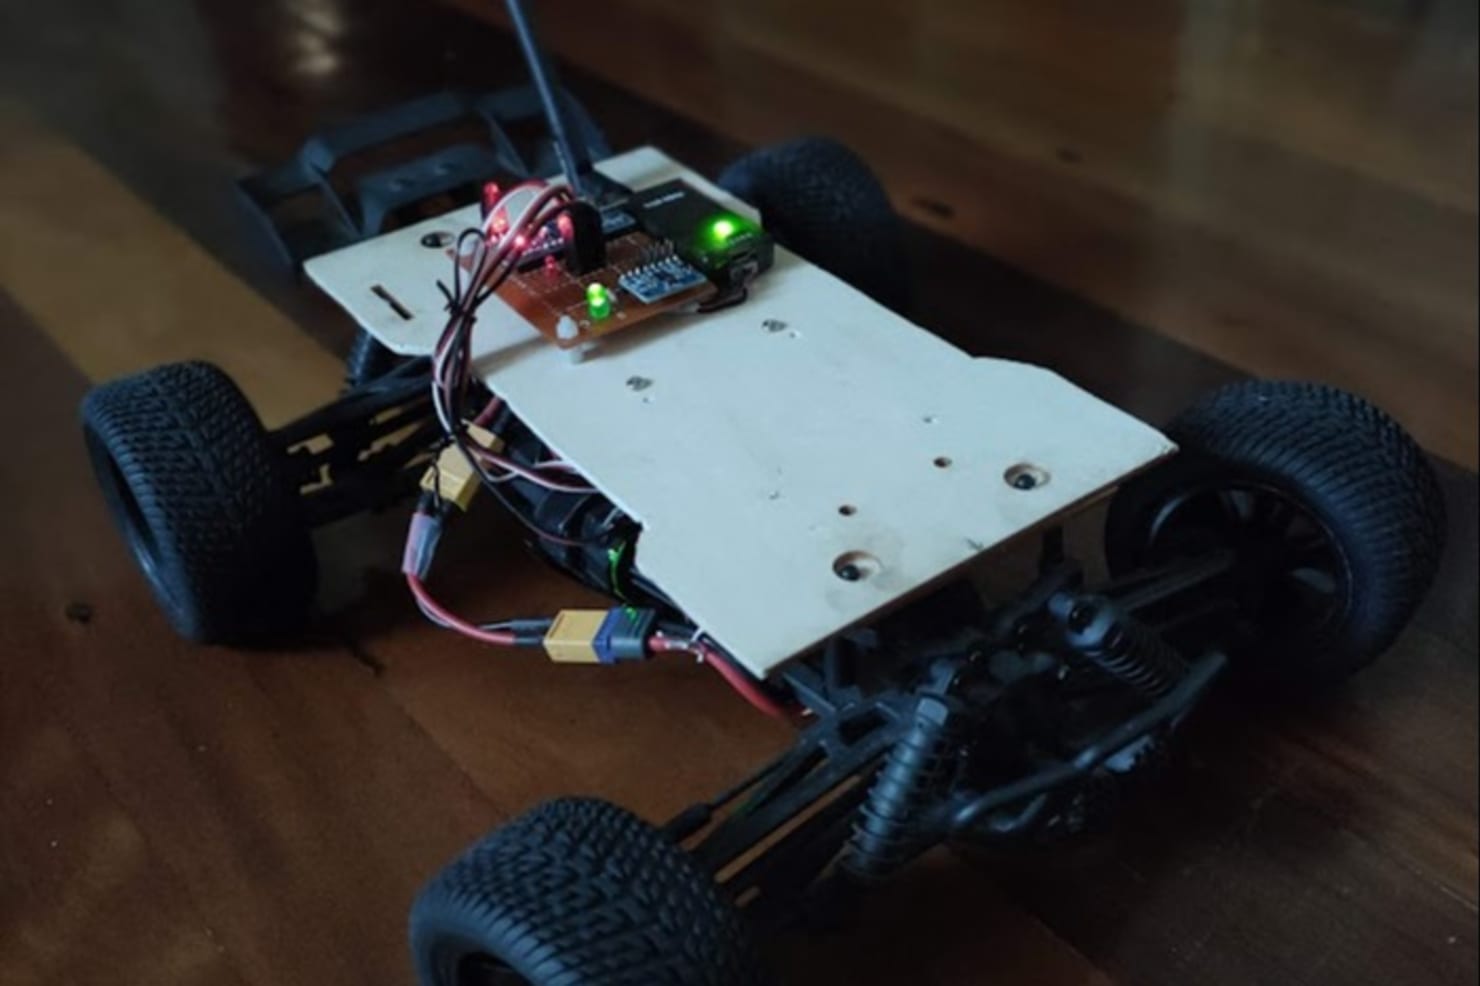 RR100 mobile research robot - ROS compatible (UGV)